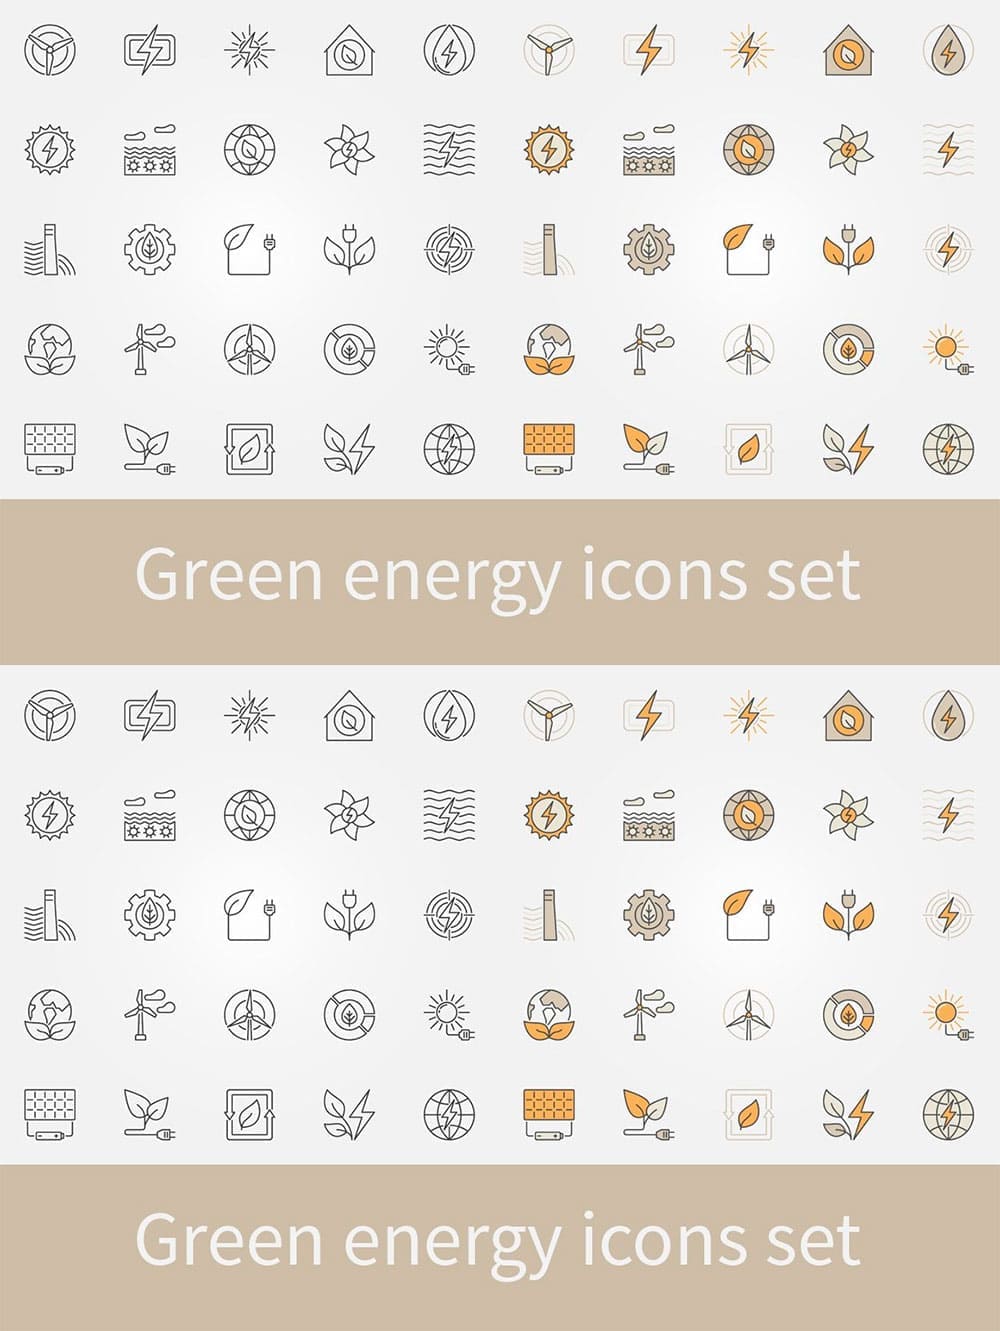 Green energy icons set, picture for pinterest.